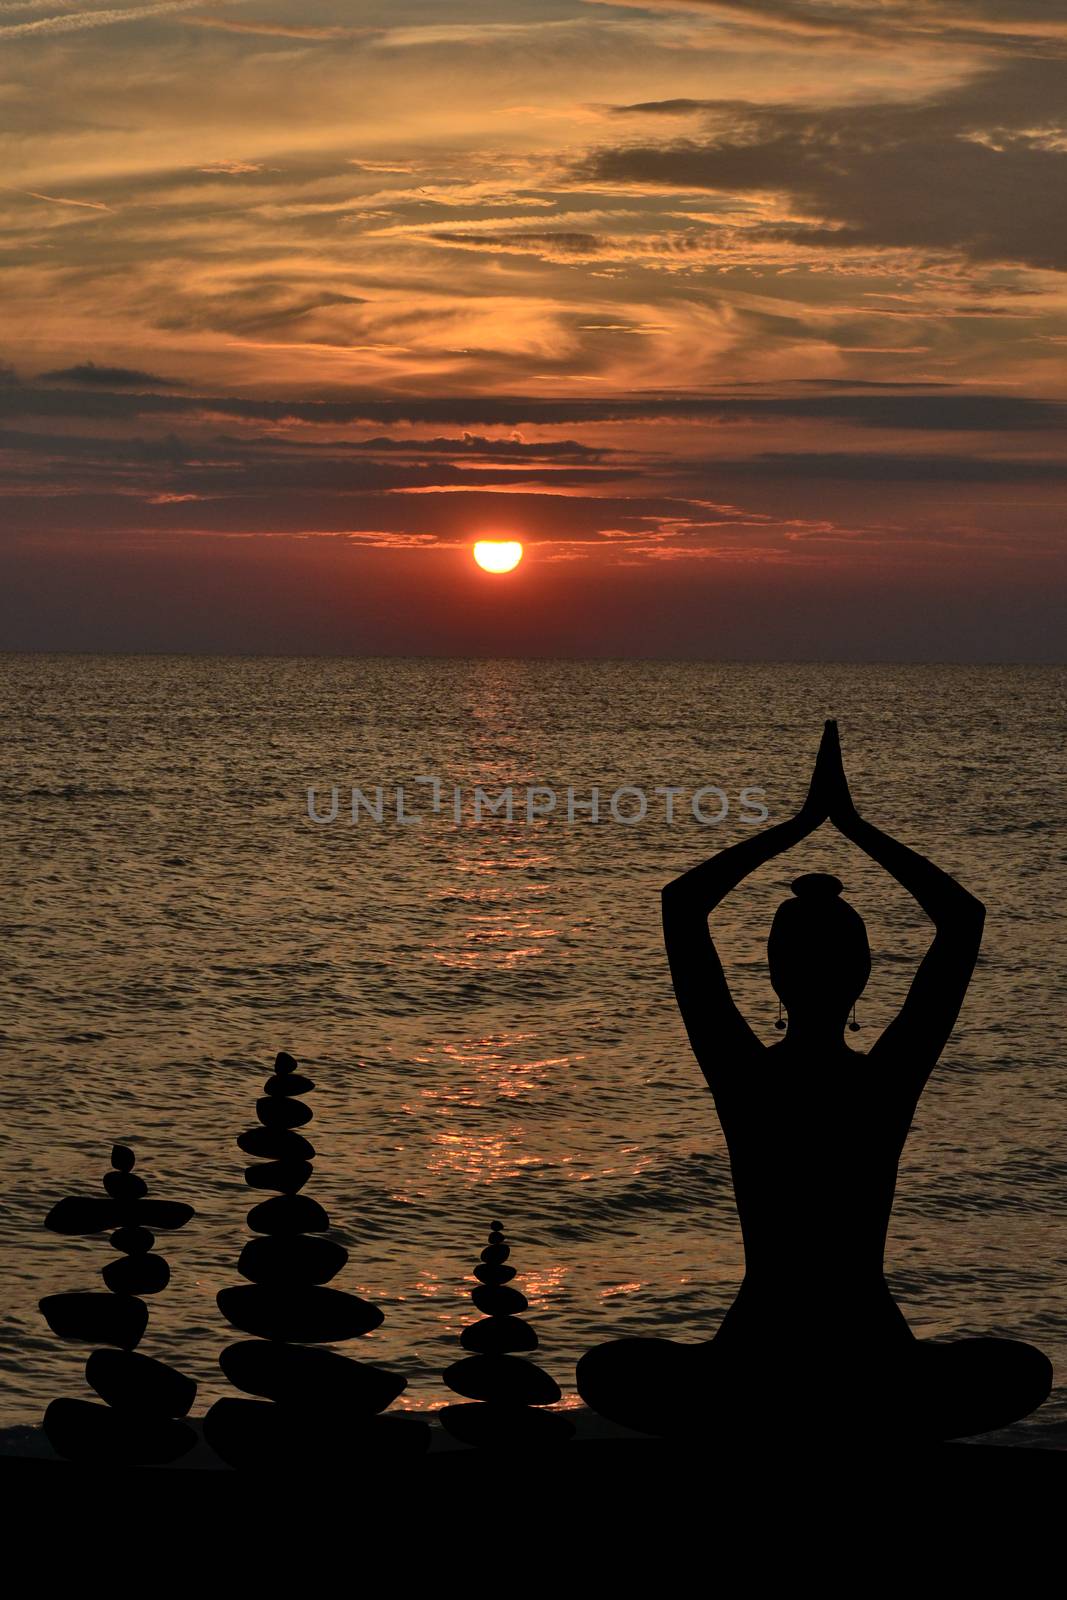 Silhouette of woman in yoga posture and balanced stones at sunri by hibrida13